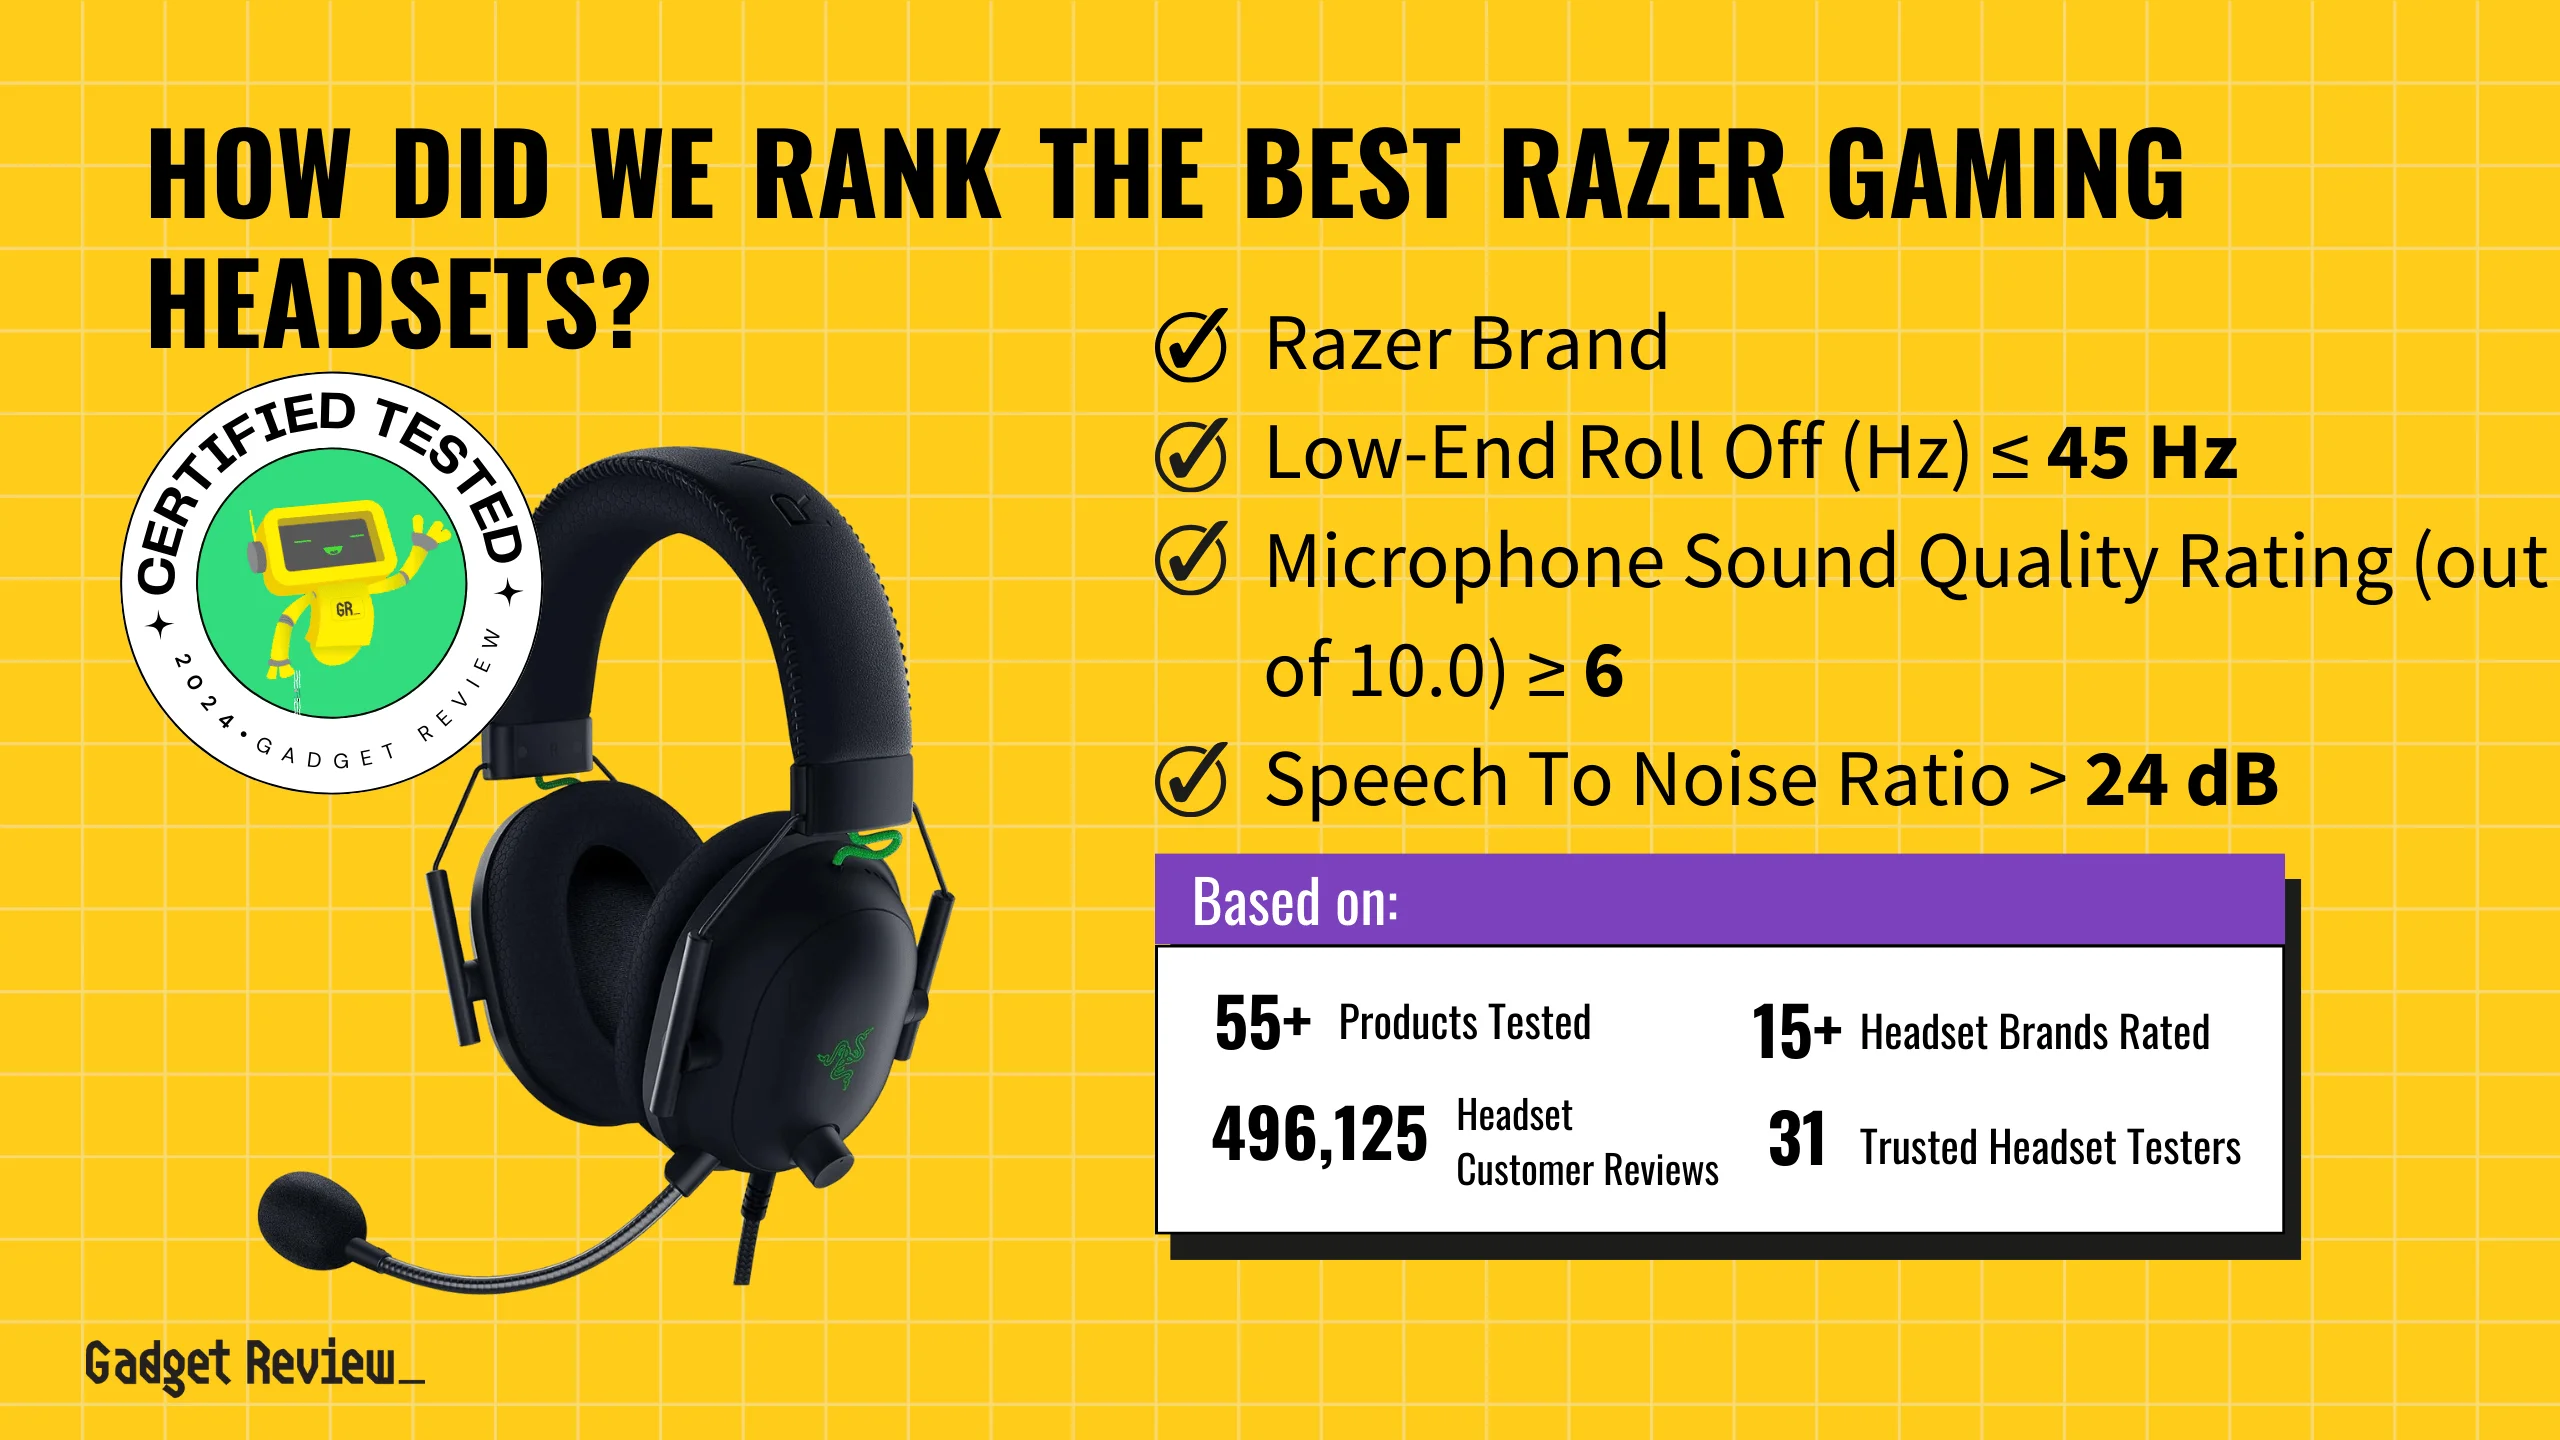 What are the 5 Top Razer Gaming Headsets?